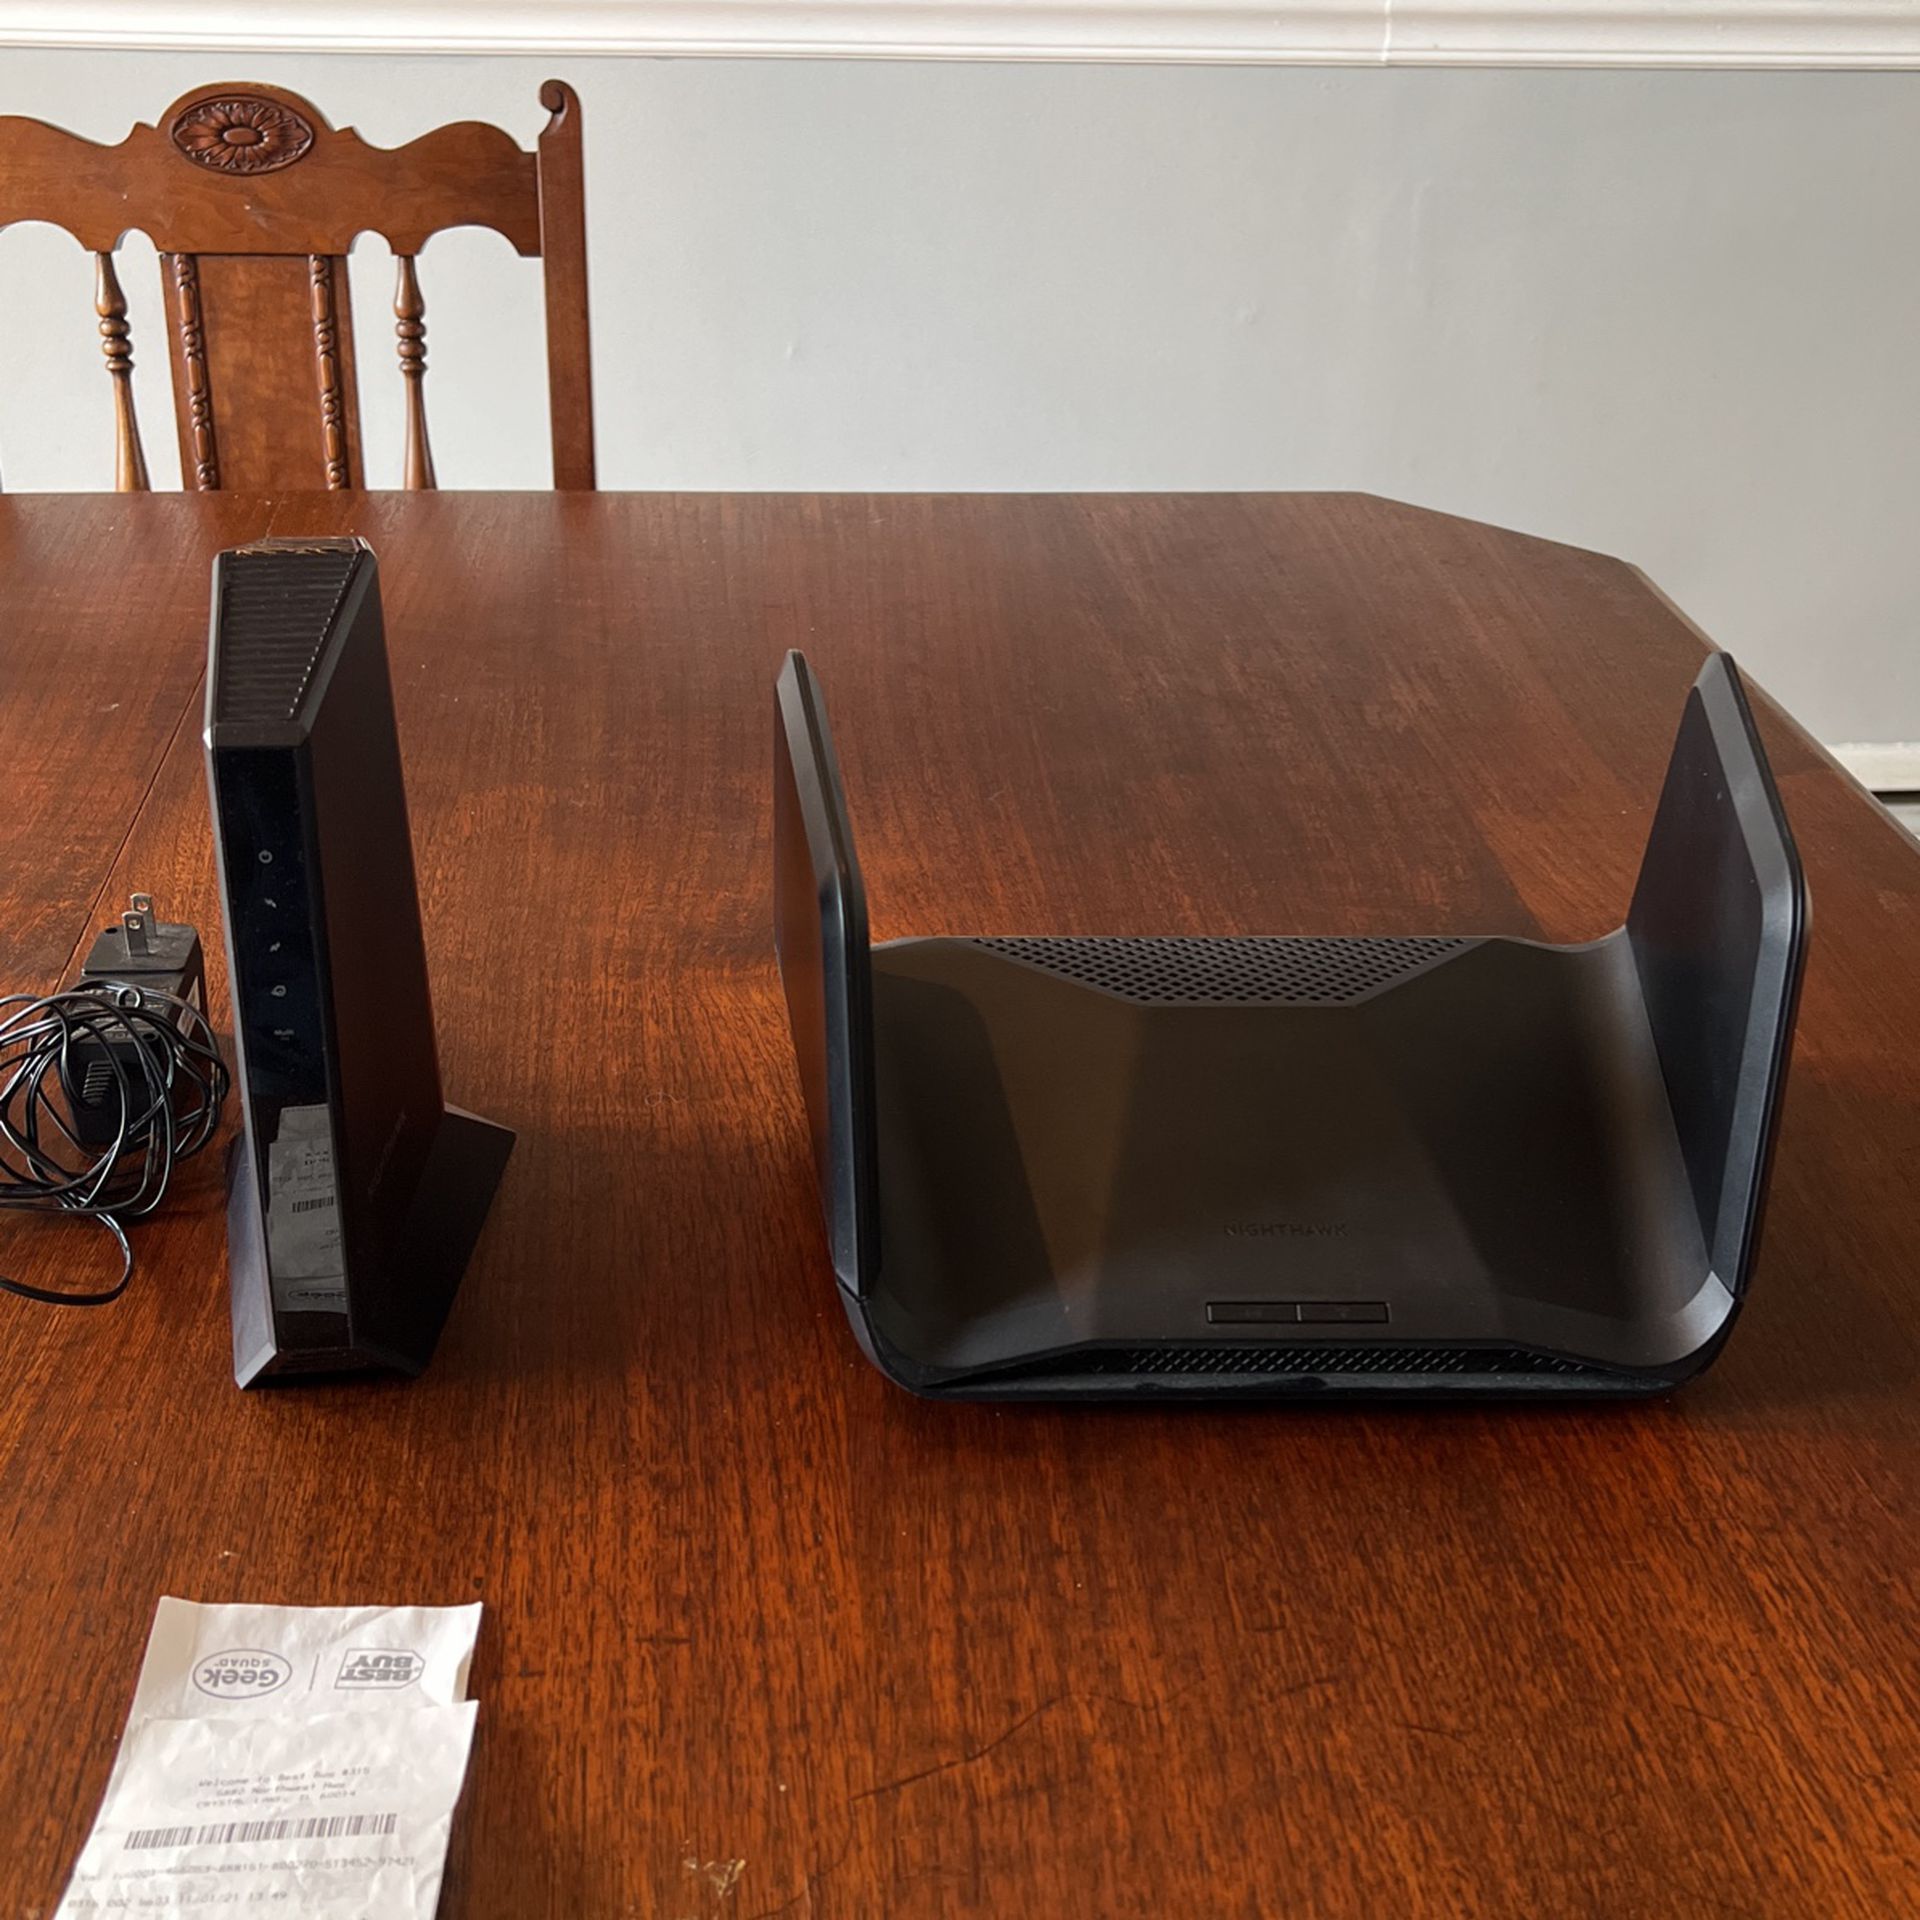 Nighthawk Router And Modem For Sale